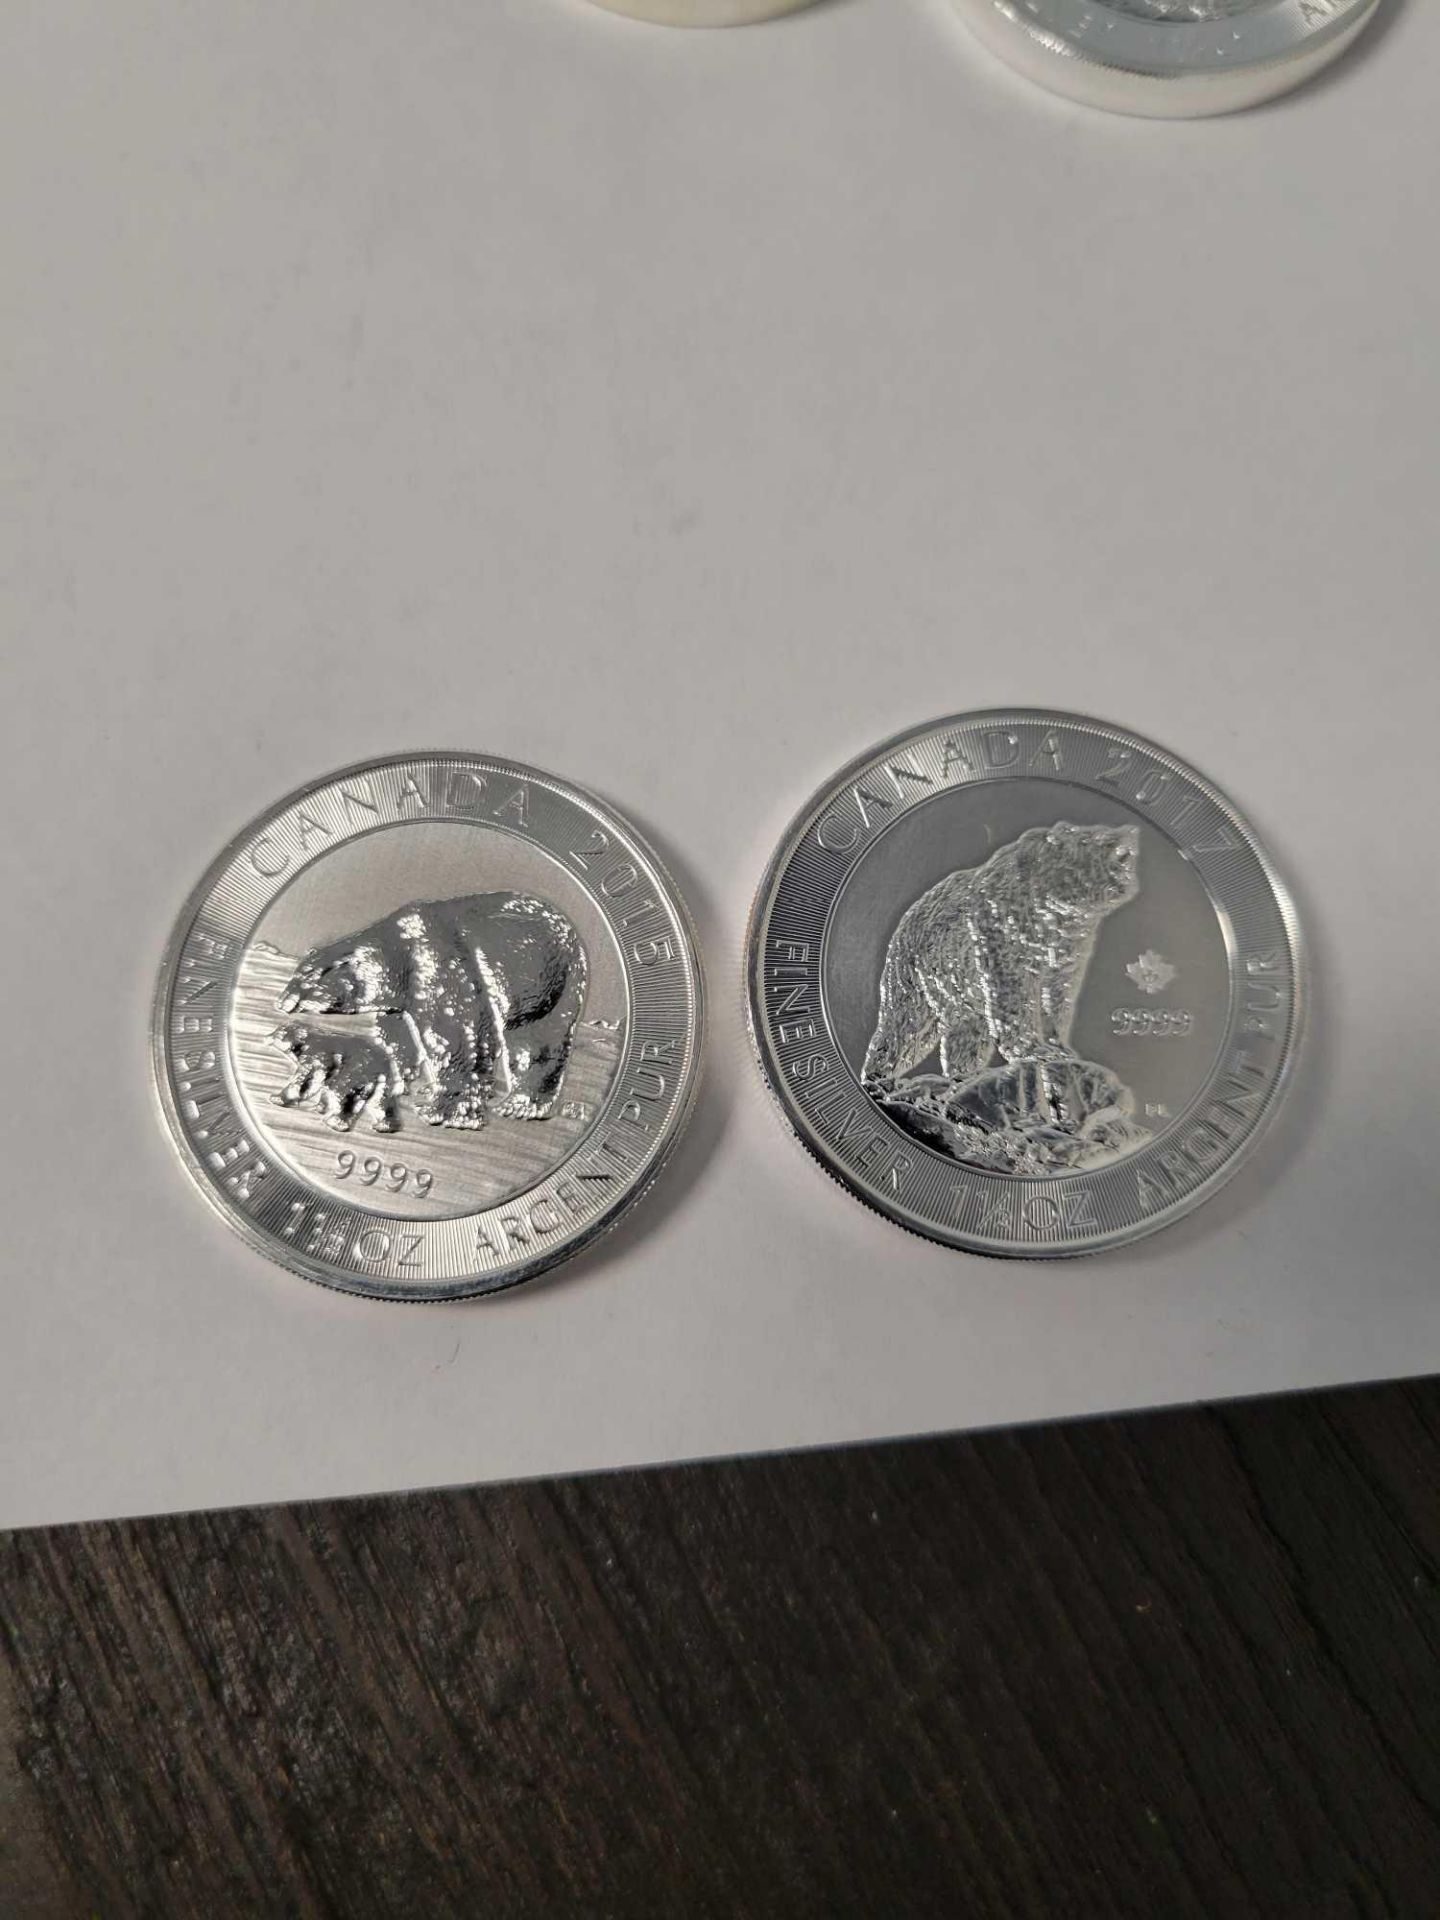 2 1.5 Oz Canadian Silver Coins with Bears - Image 5 of 5